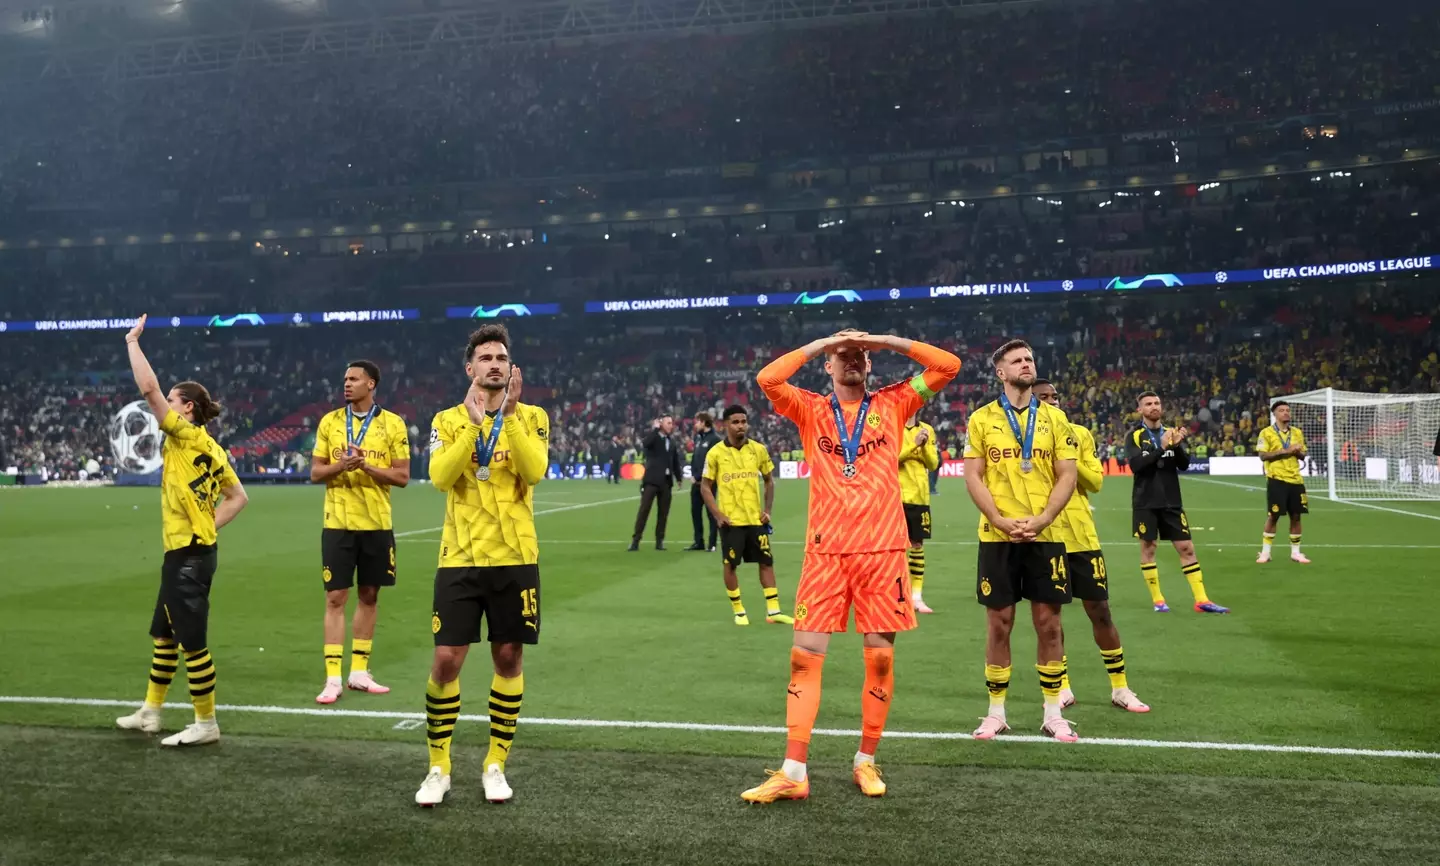 Dortmund are in the Club World Cup despite losing the Champions League final (Getty)